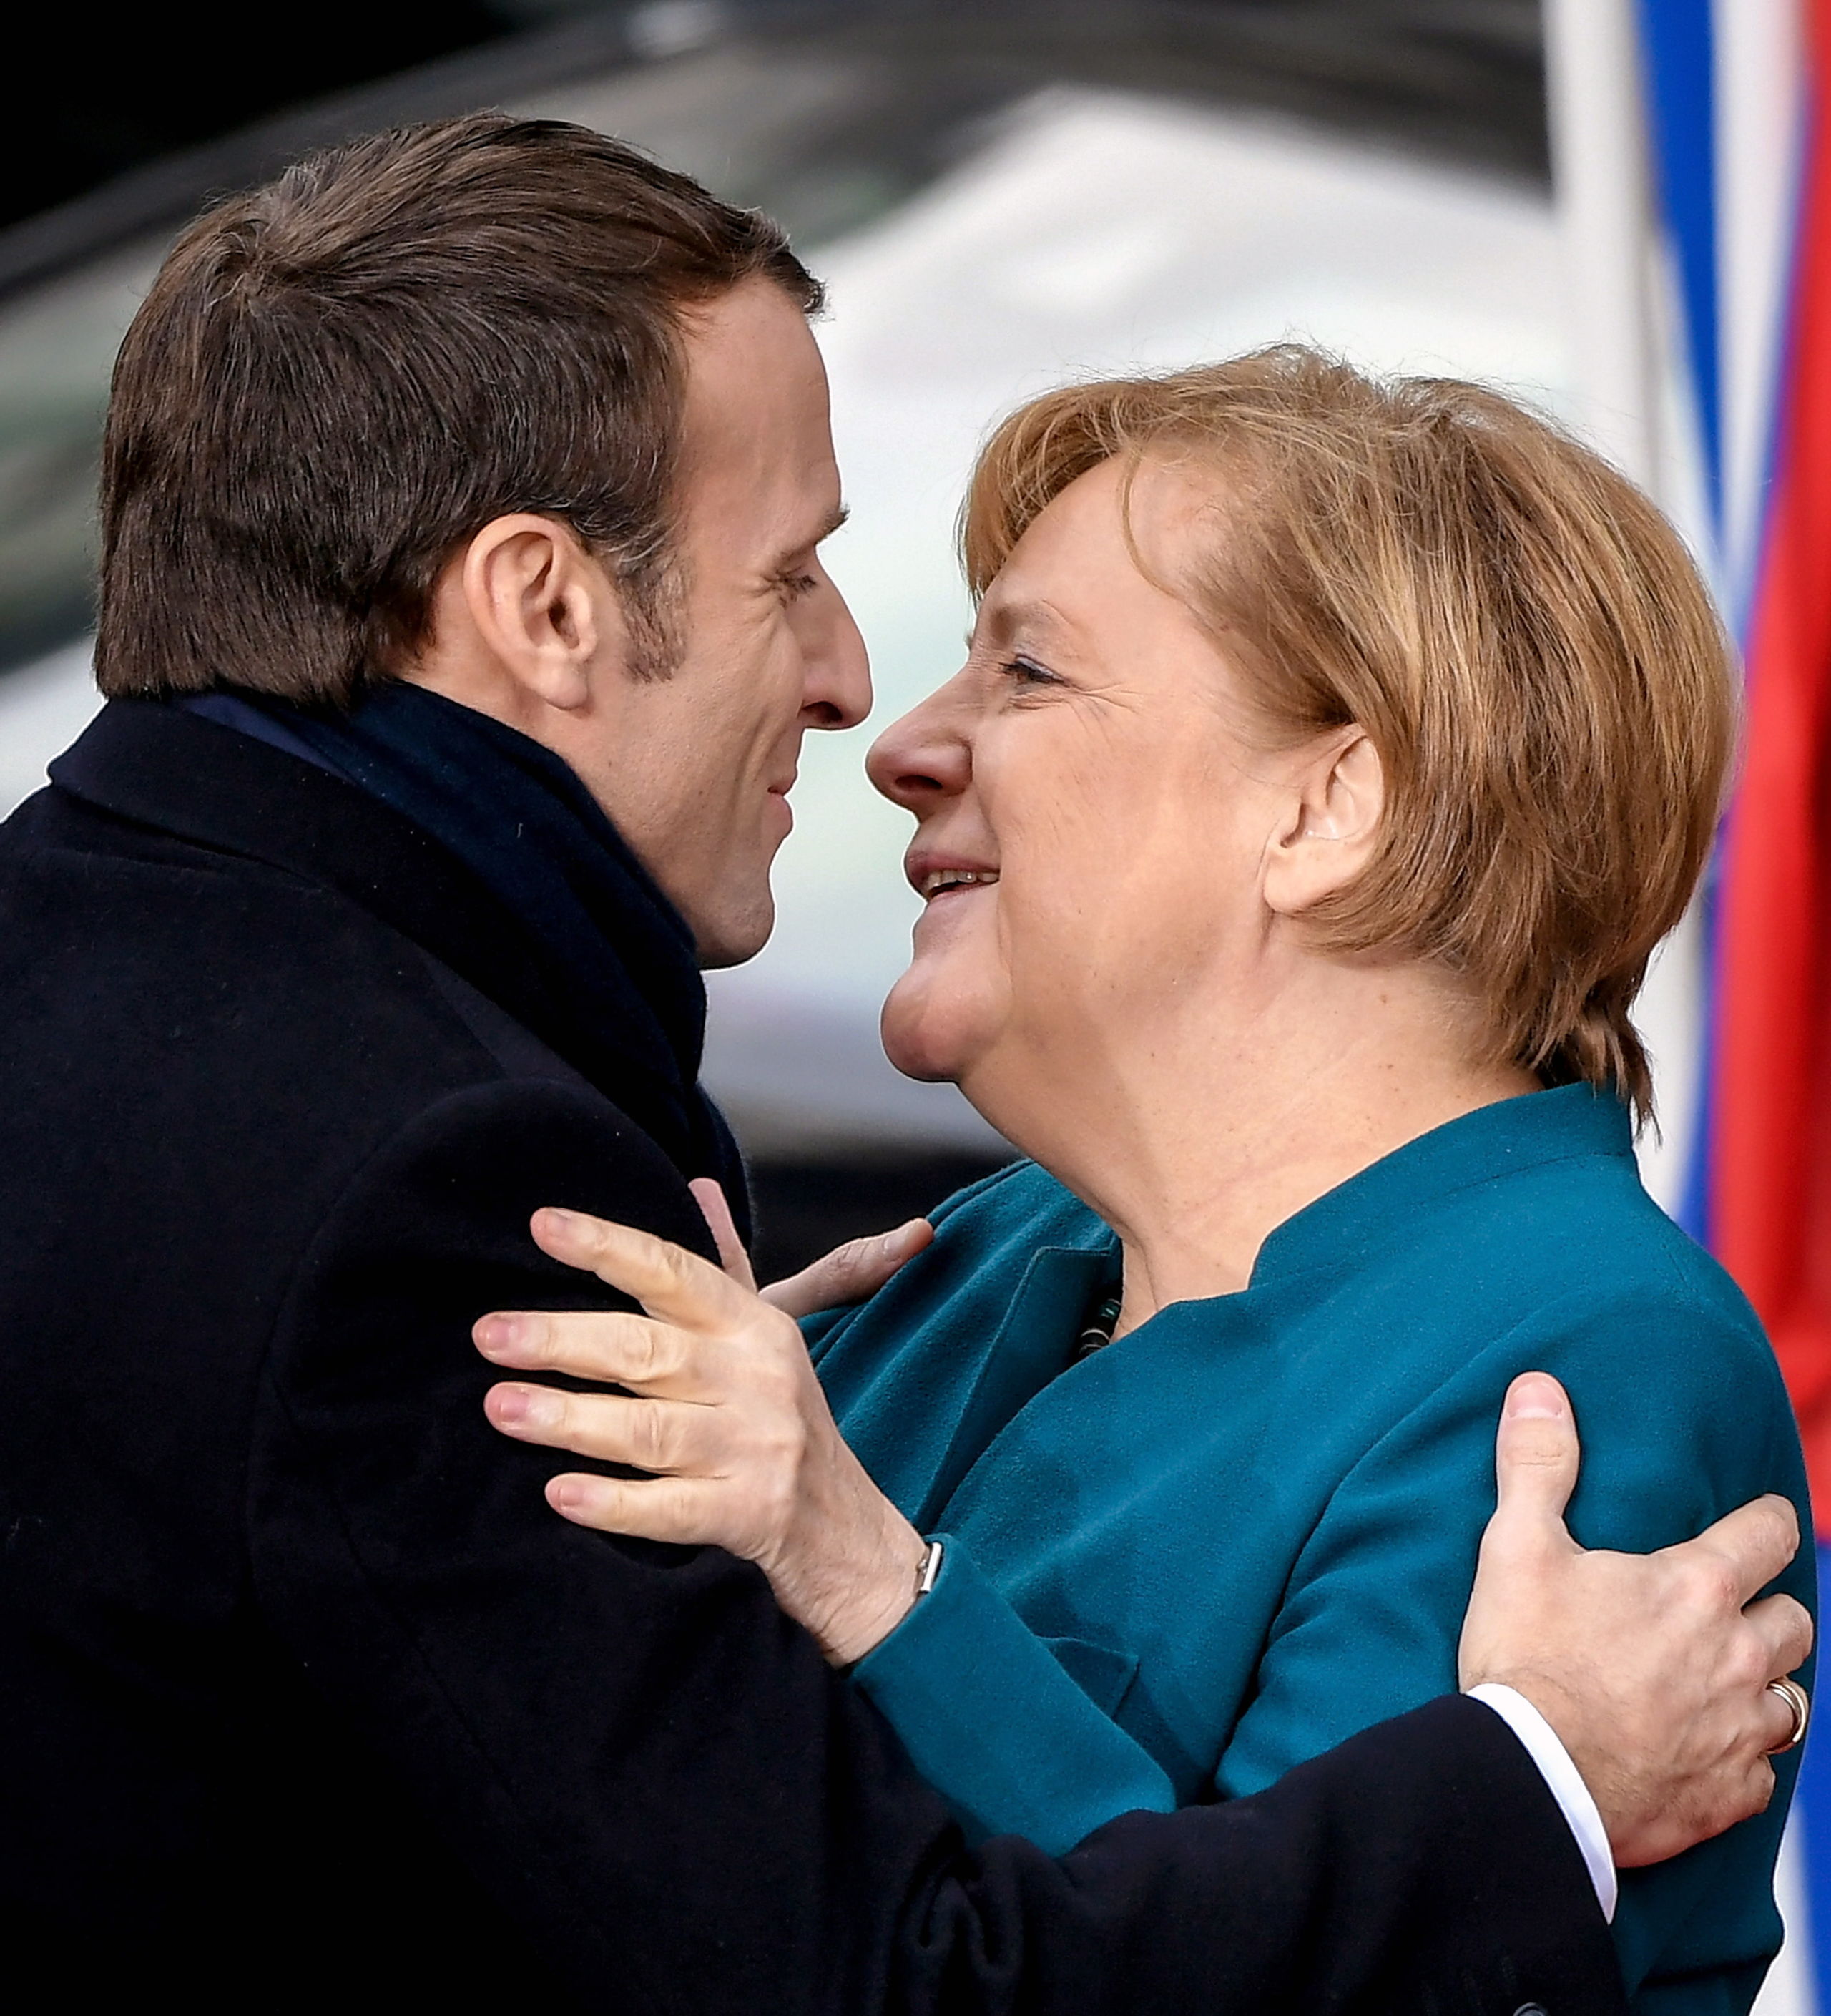 2019-01-22 10:45:59 epa07309228 German Chancellor Angela Merkel (R) and French President Emmanuel Macron (L) greet each other as they arrive for the signing of a new Franco-German friendship treaty in Aachen, Germany, 22 January 2019. President Macron and Chancellor Merkel signed a new friendship treaty, intended to supplement the 1963 Elysee Treaty, pledging to provide deeper economic and defense ties and commitment to the EU.  EPA/SASCHA STEINBACH